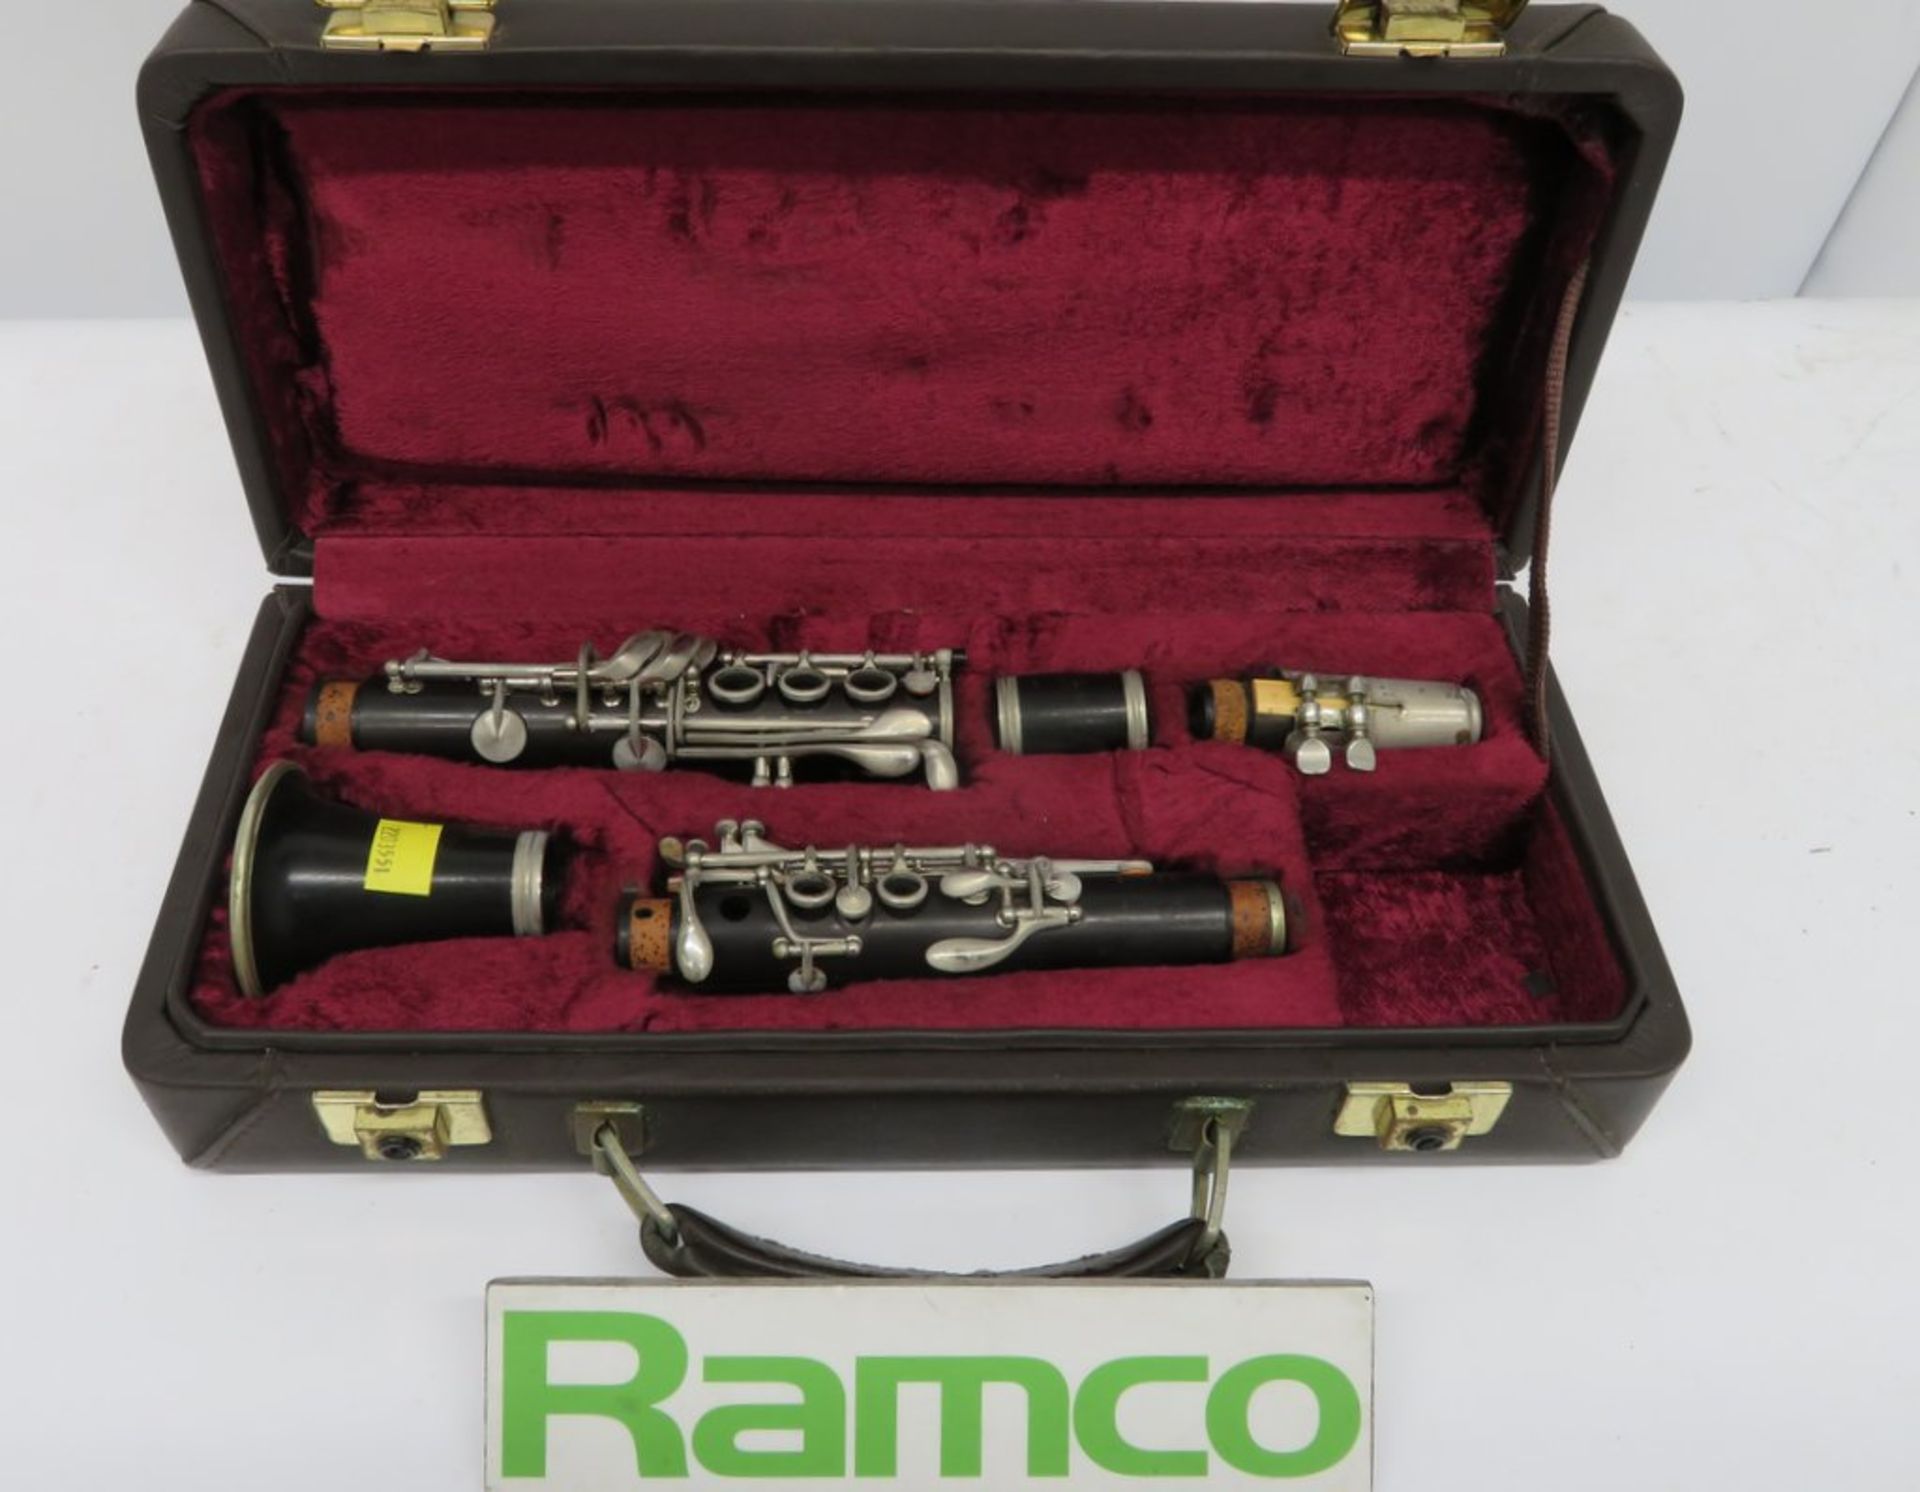 Buffet Crampon E Flat Clarinet With Case. Serial Number: 406320. Full length 42cm Please